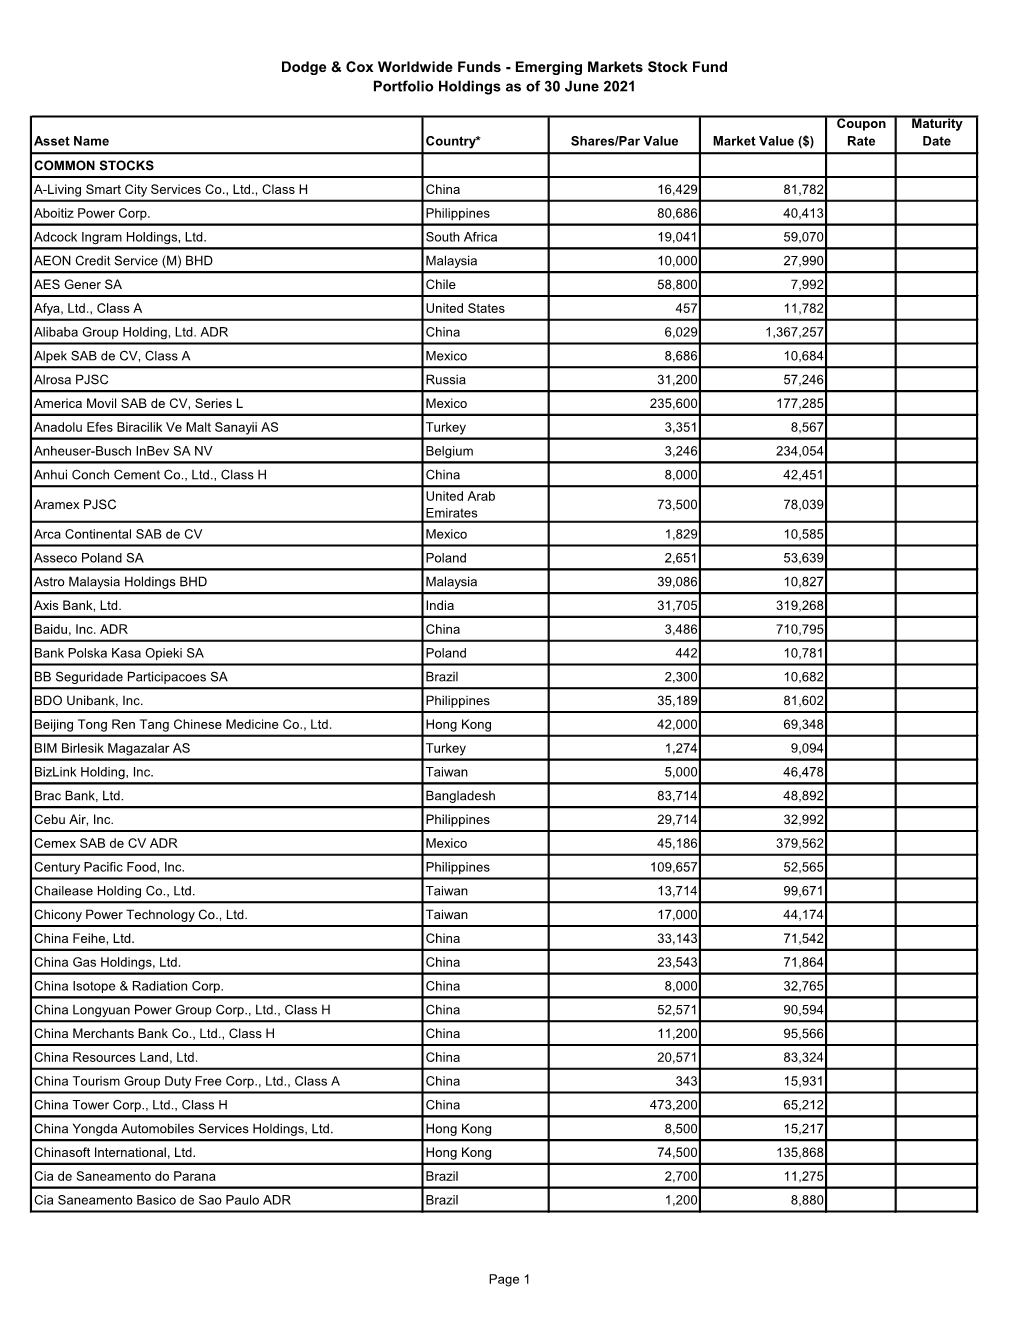 Fund Holdings